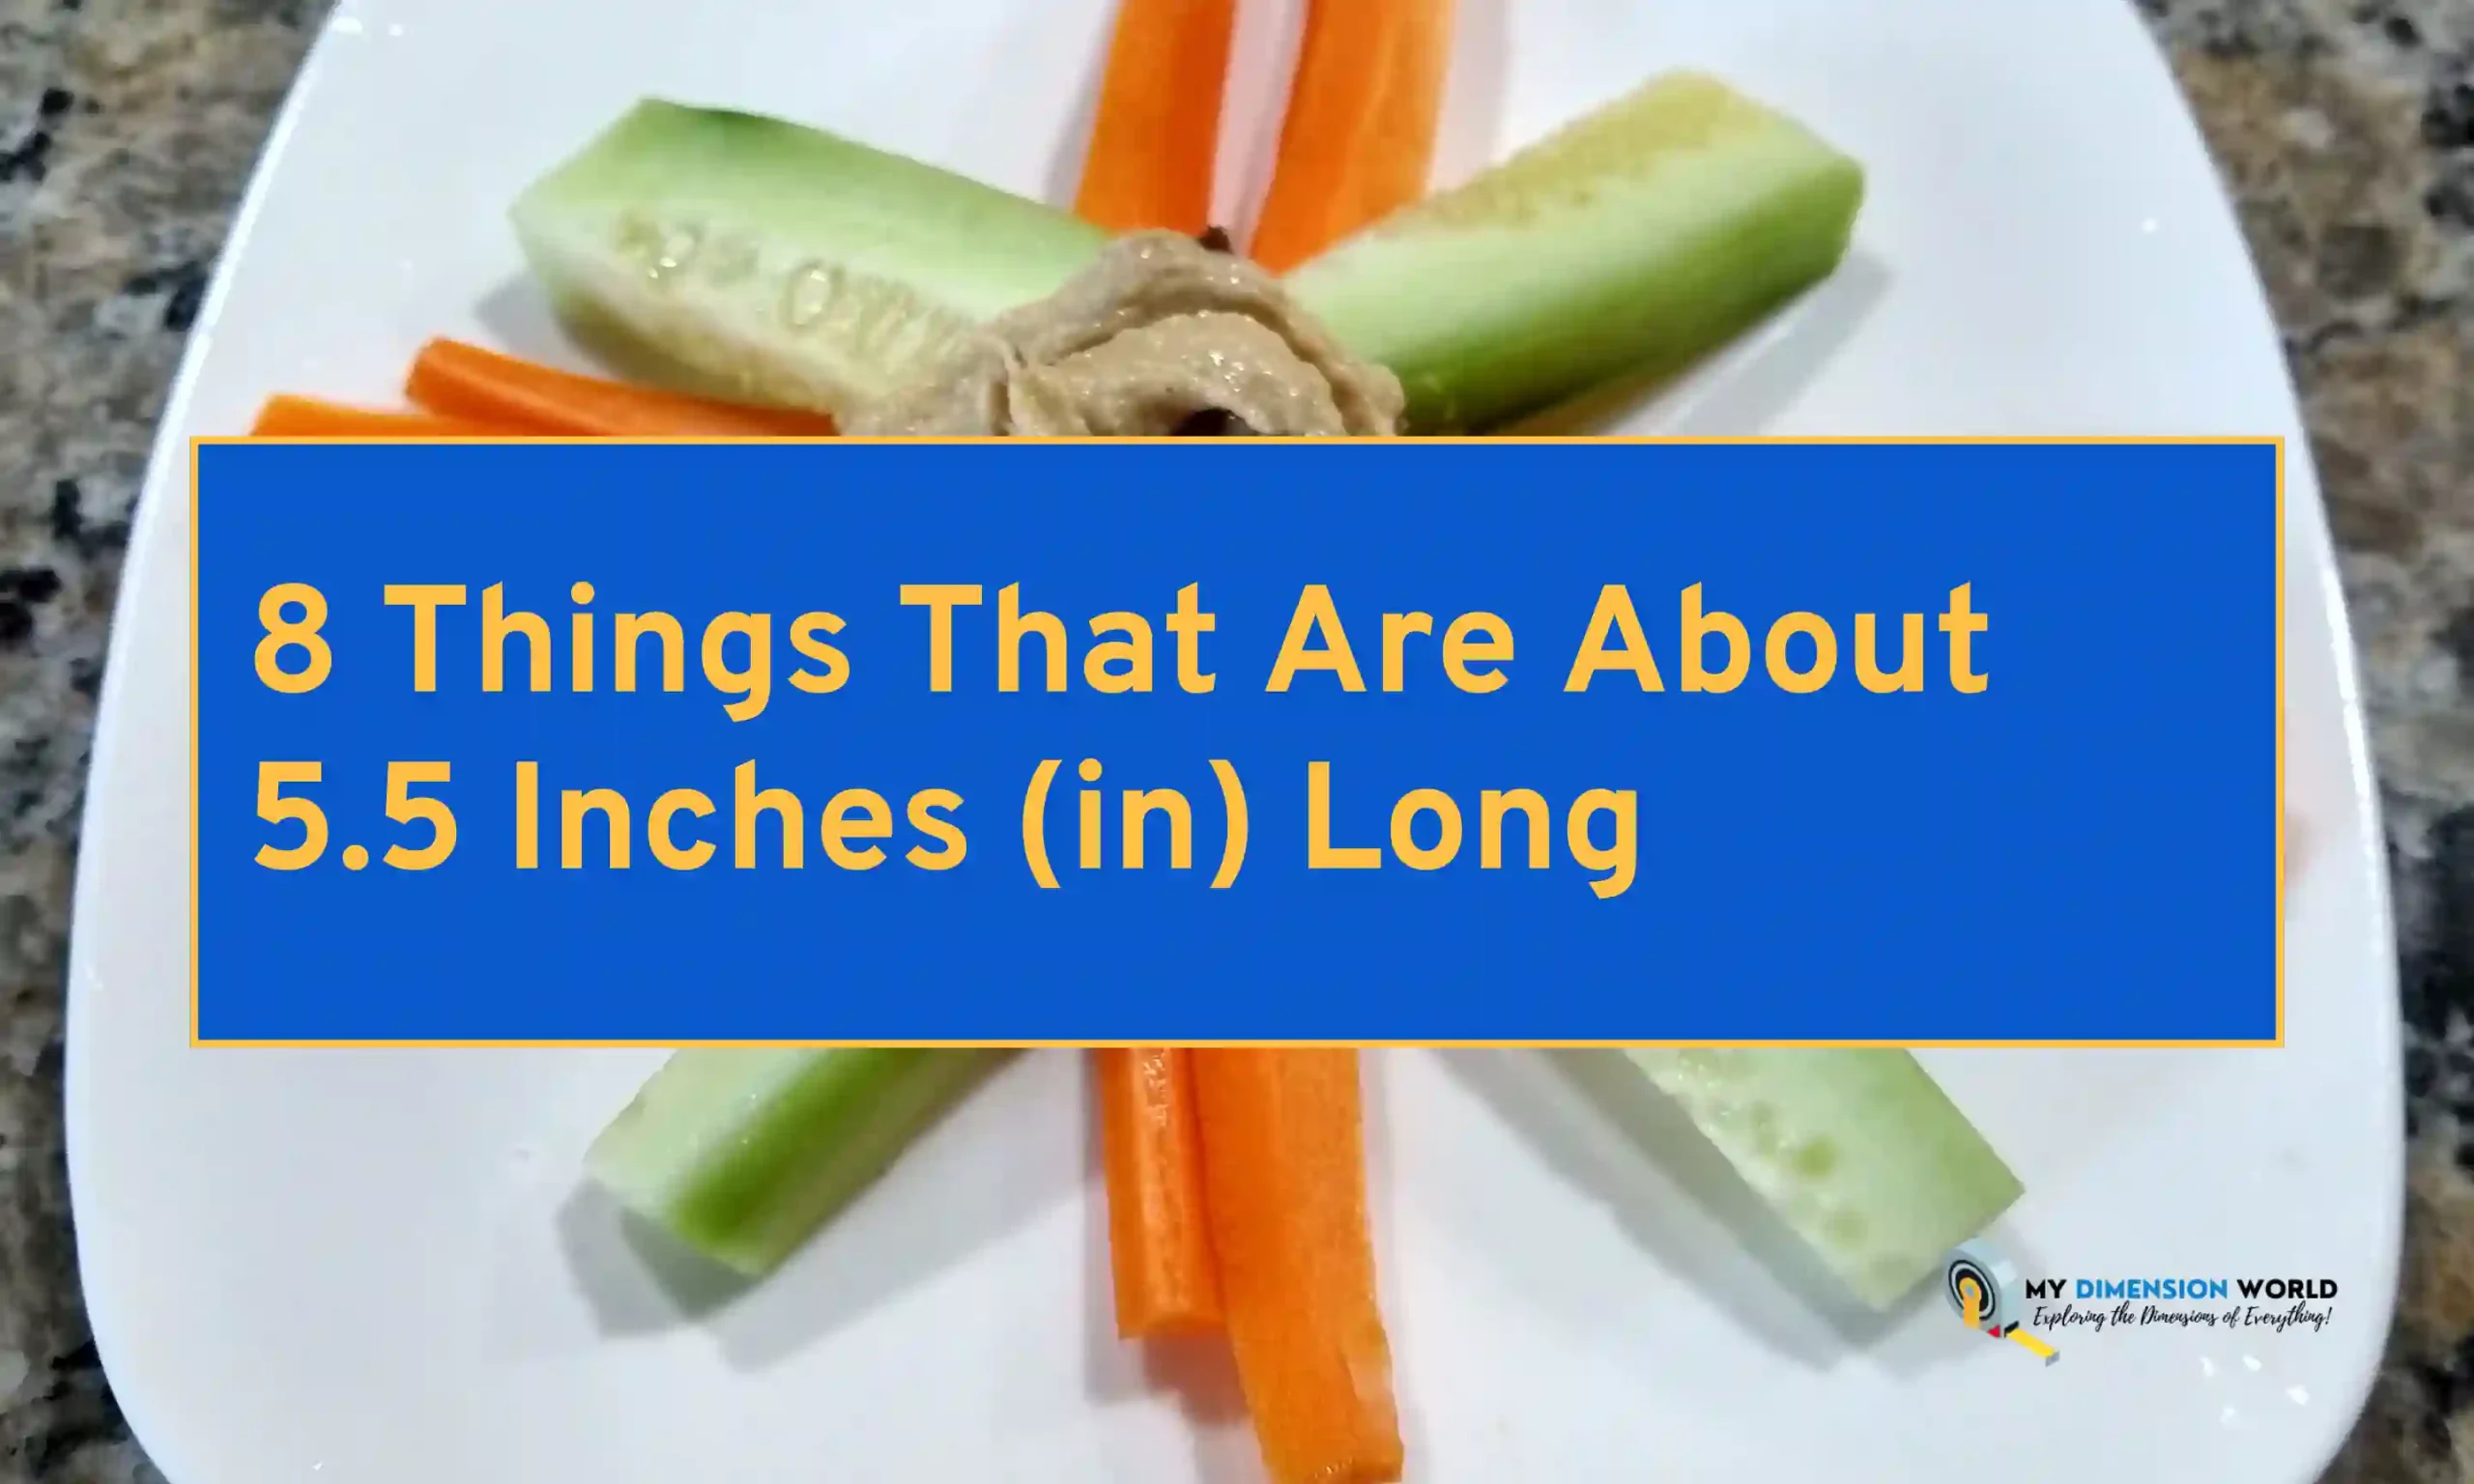 8 Things That Are About 5.5 Inches (in) Long